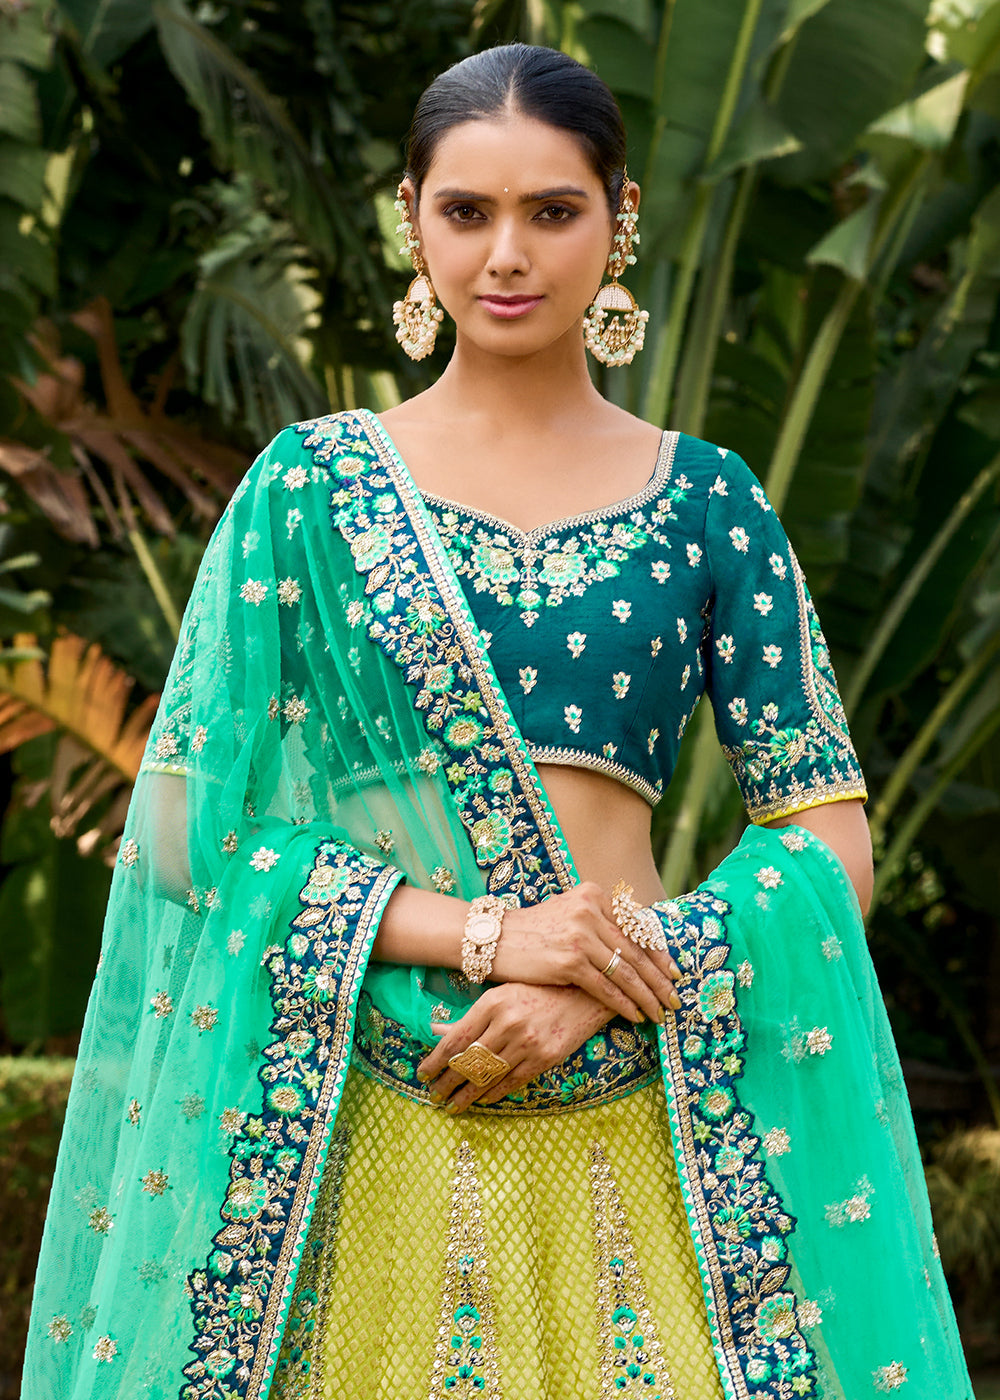 Shades Of Blue Crepe Georgette Lehenga with Embroidery, Thread work & Jacquard Butti all over